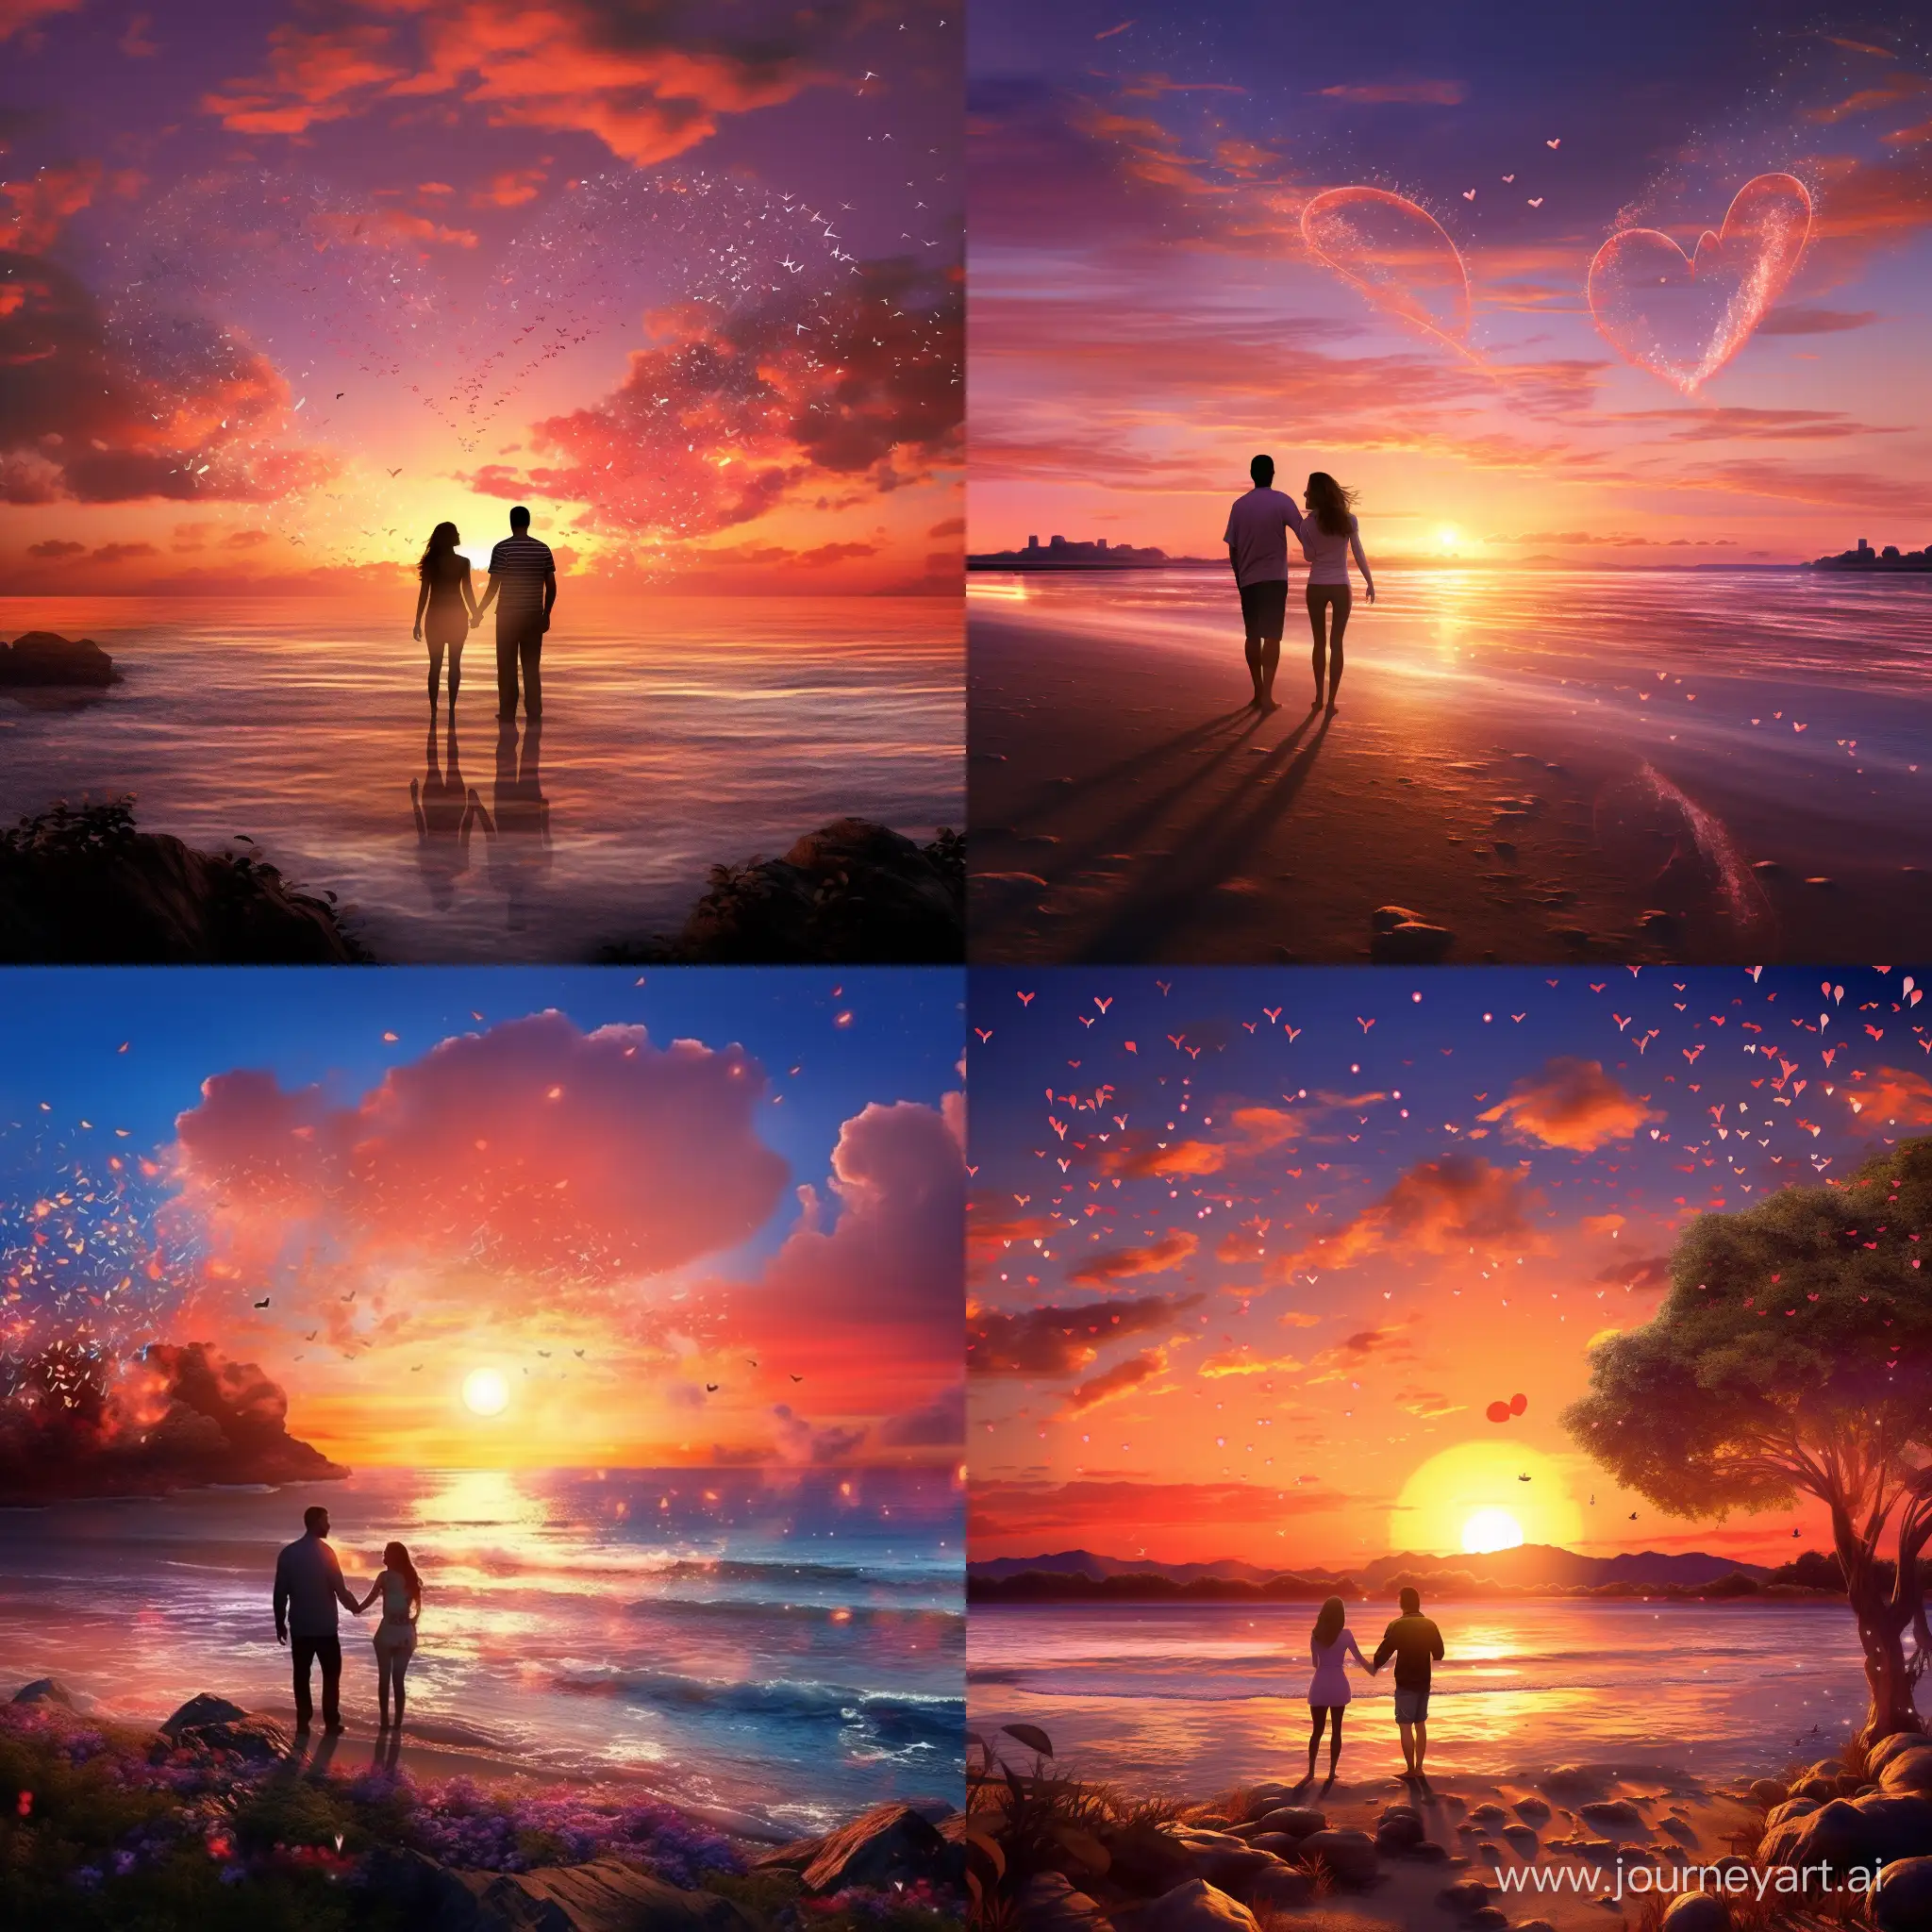 Valintines day, realistic photo quality of the love I have for you!. My sweetheart. A landscape of a beautiful romantic ocean sunset